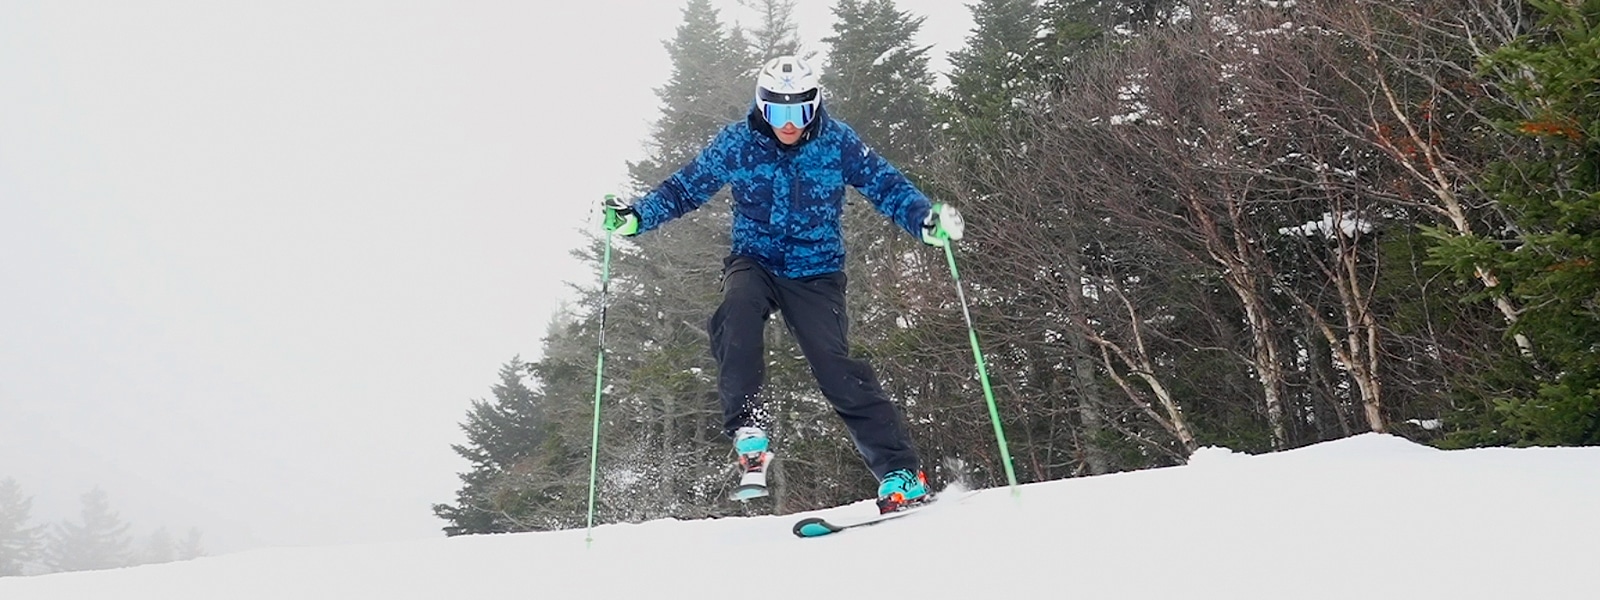 How-To Train: Top Drills For Ski Racing